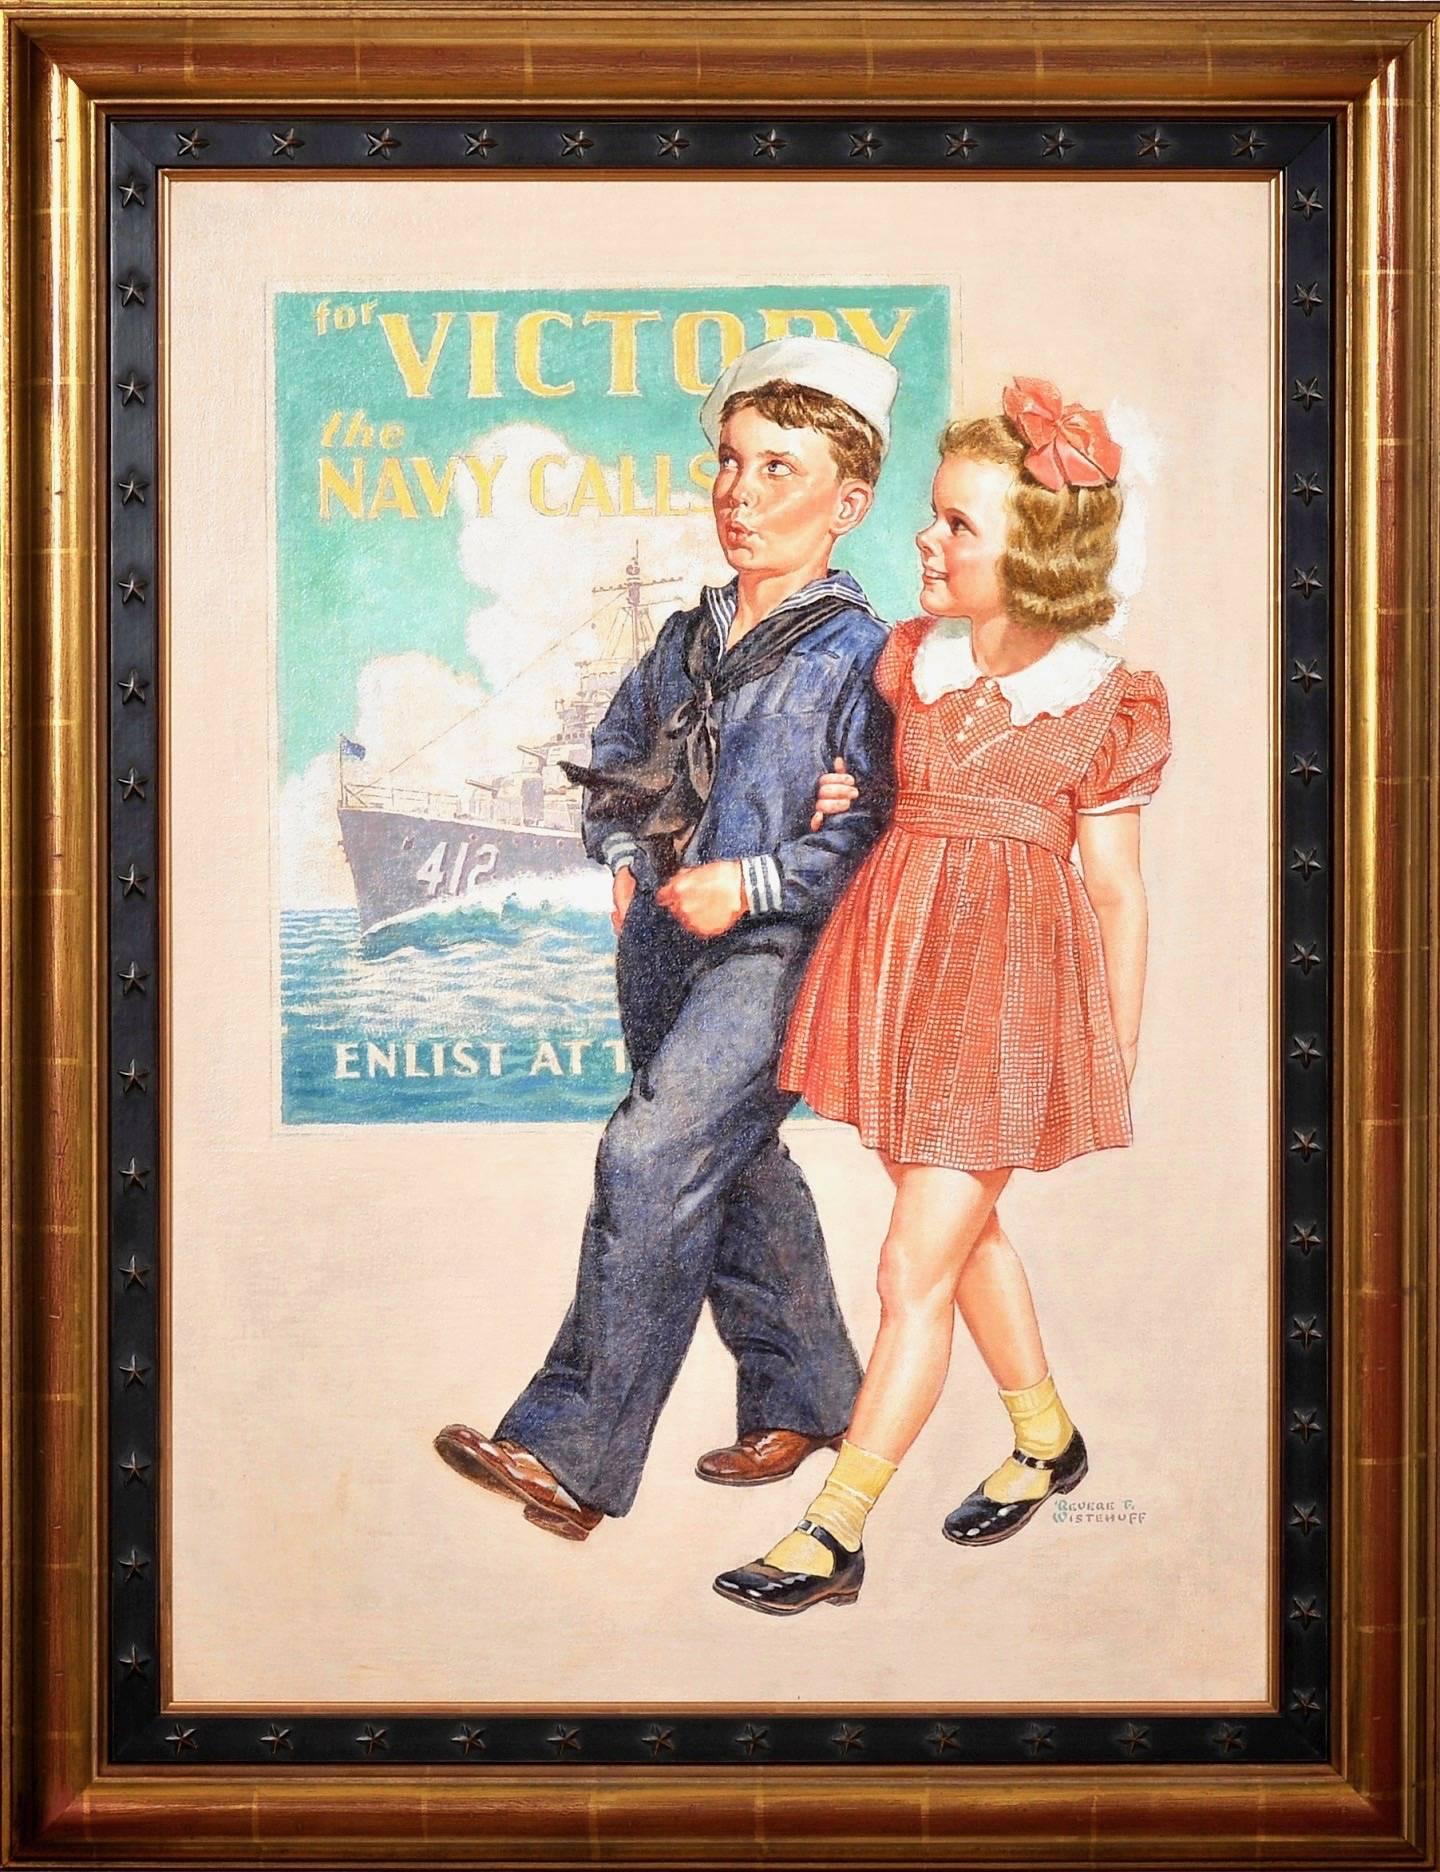 For Victory the Navy Calls - Other Art Style Painting by Revere Wistehuff